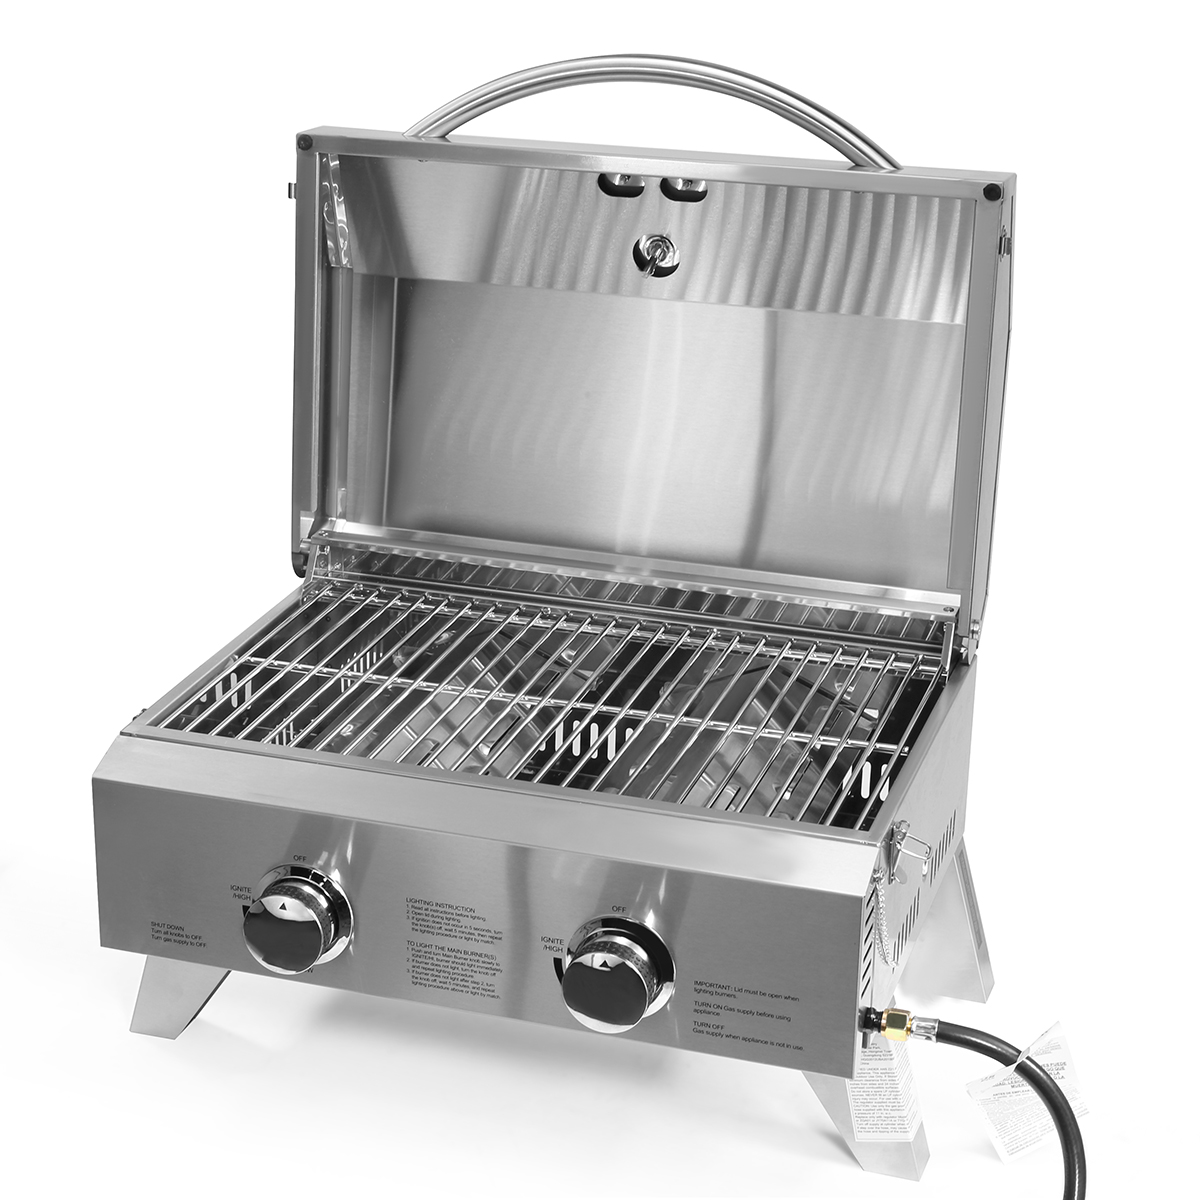 Tabletop 20,000 BTU, 2 Burner Grill Portable BBQ Table Top Propane Gas Grill With Foldable Legs, Stainless Steel - image 1 of 4